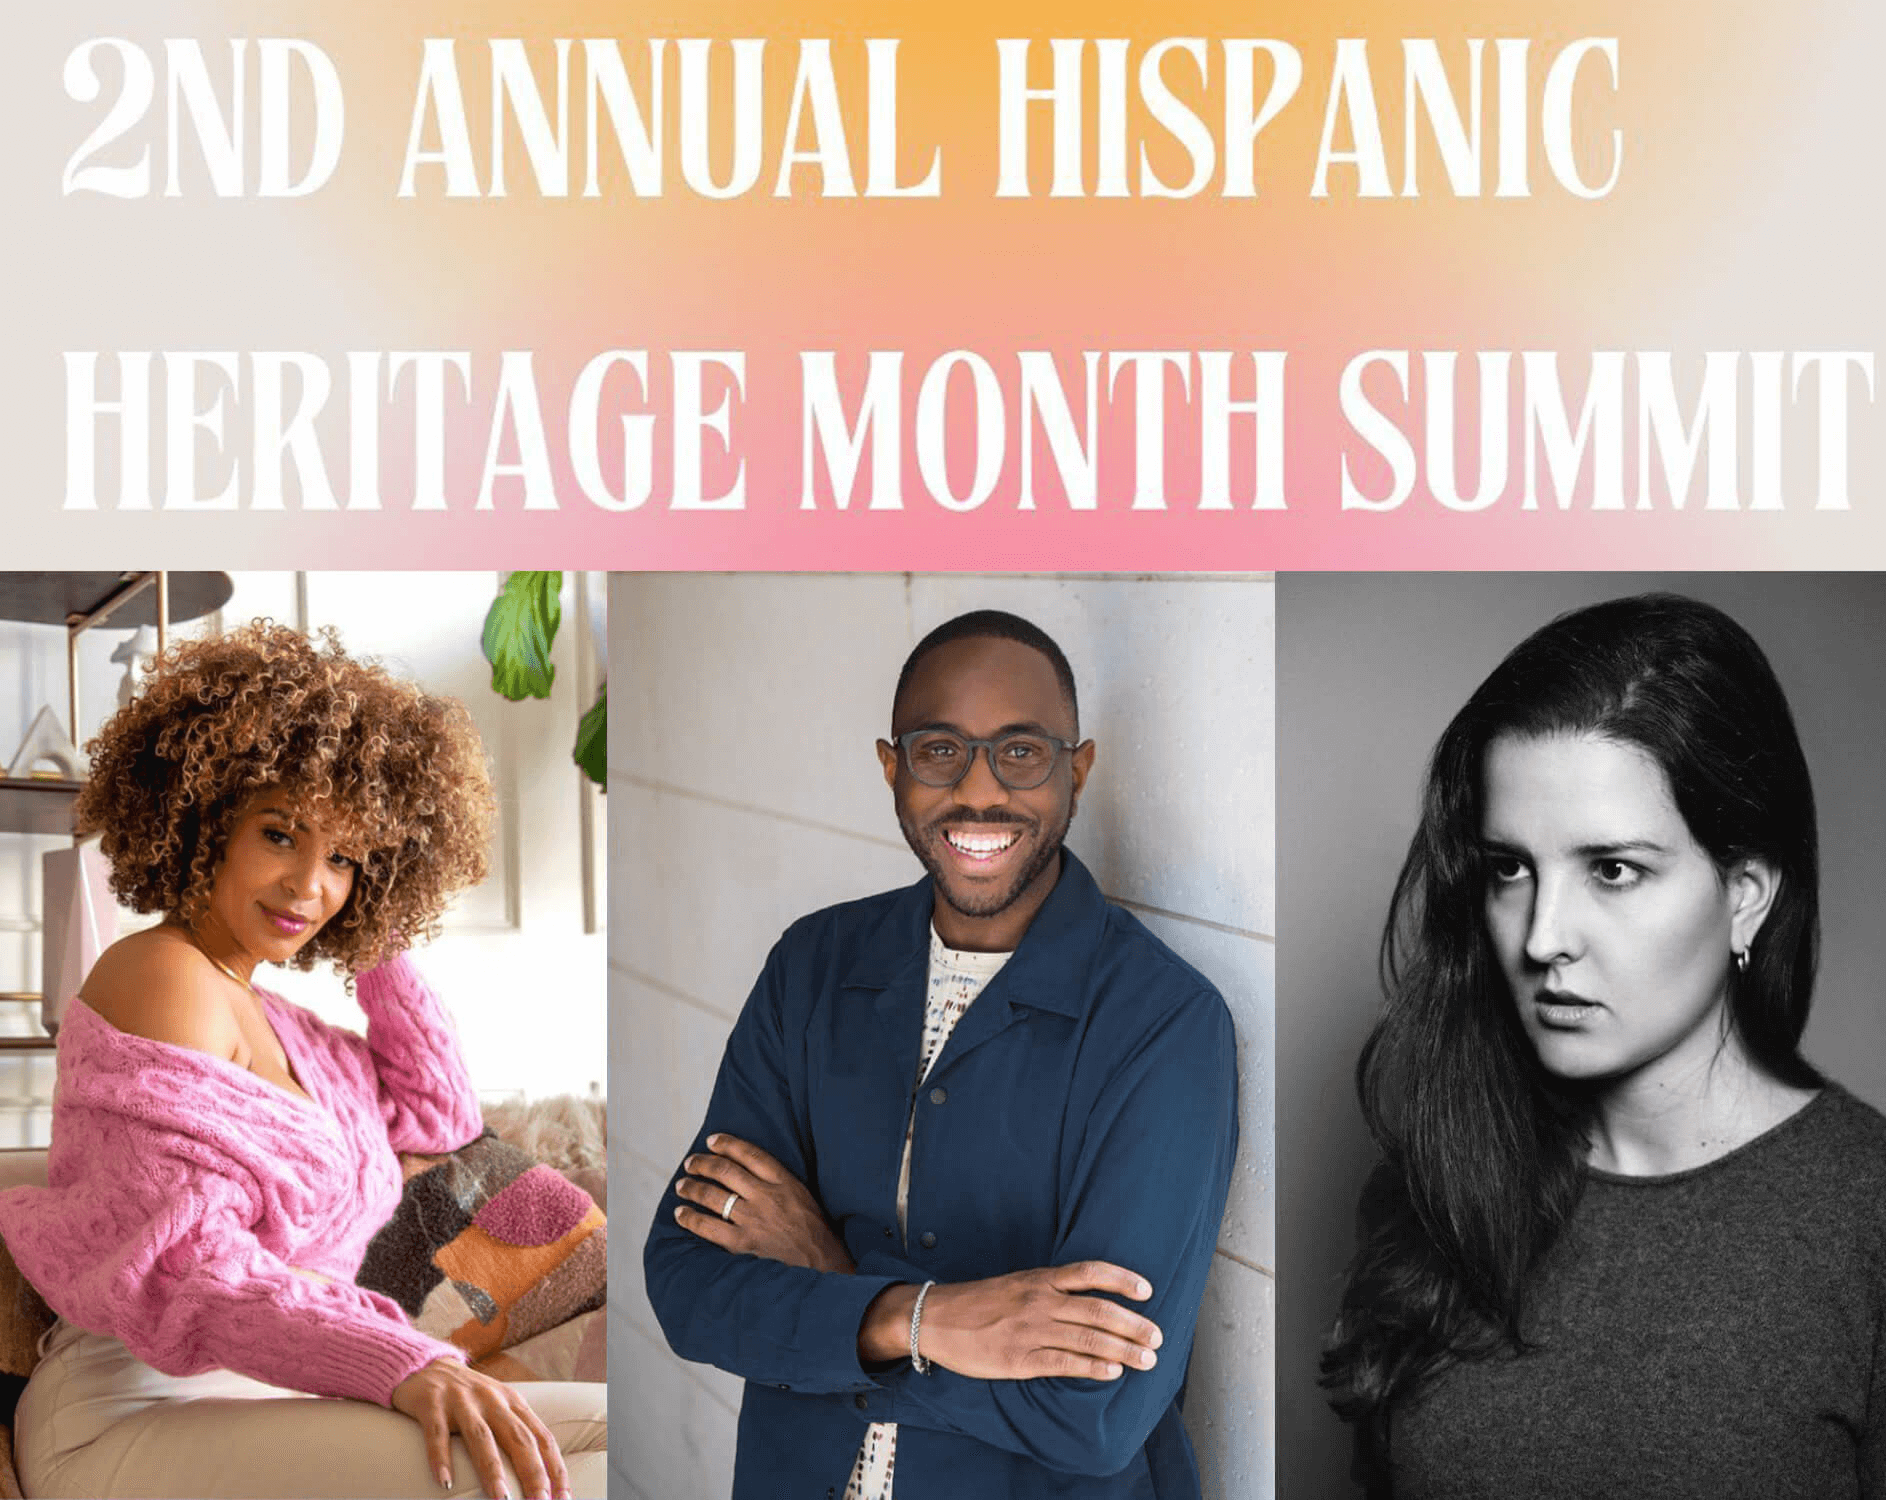 Erica Dickerson, the Global Beauty Director at the cosmetics company Beautyblender; Jonathan Hall, the Director of Belonging at Neiman Marcus Group; and Graciela Martin, a London-based luxury fashion consultant and journalist who focuses on Latin America